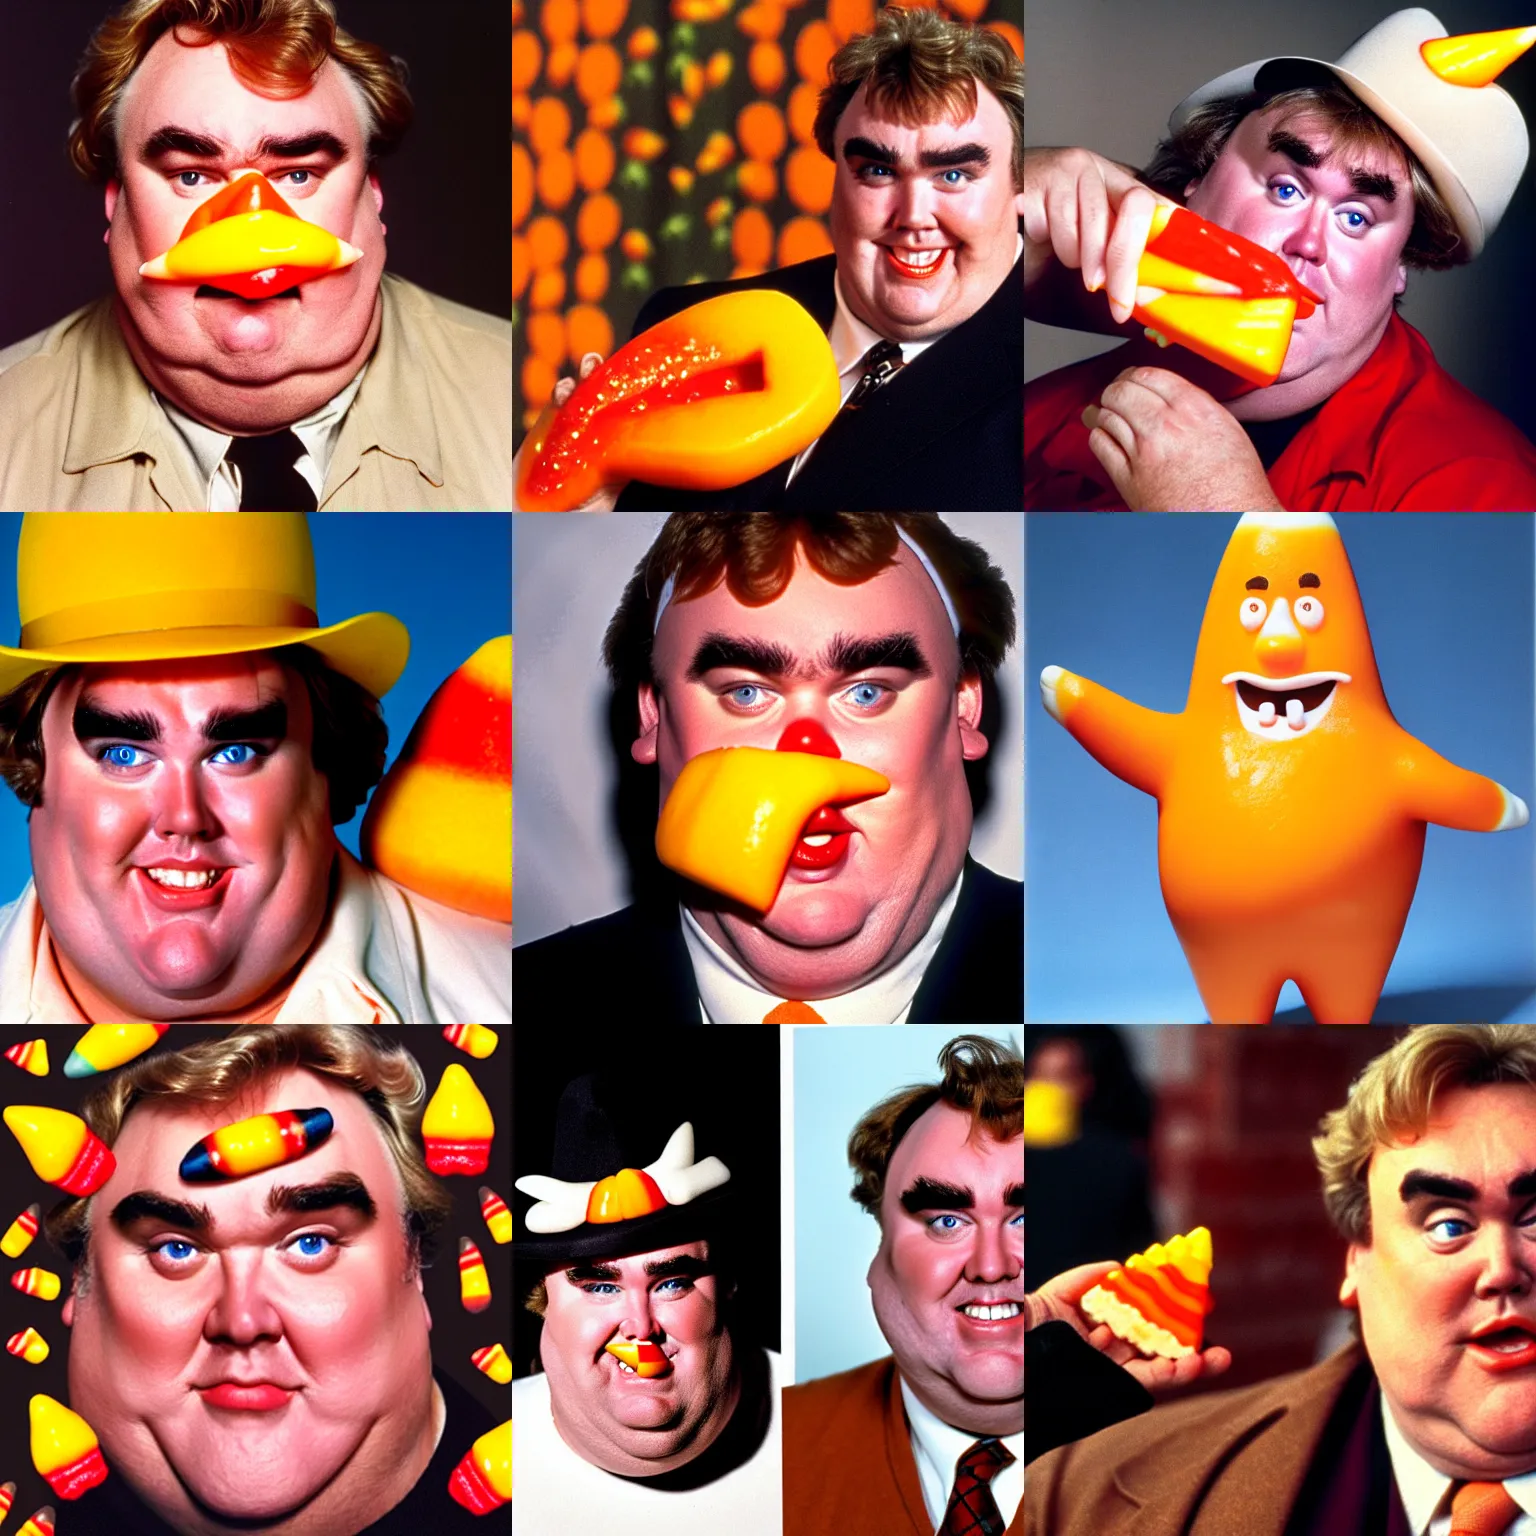 Prompt: john candy, face is candy corn, skin is made of candy corn